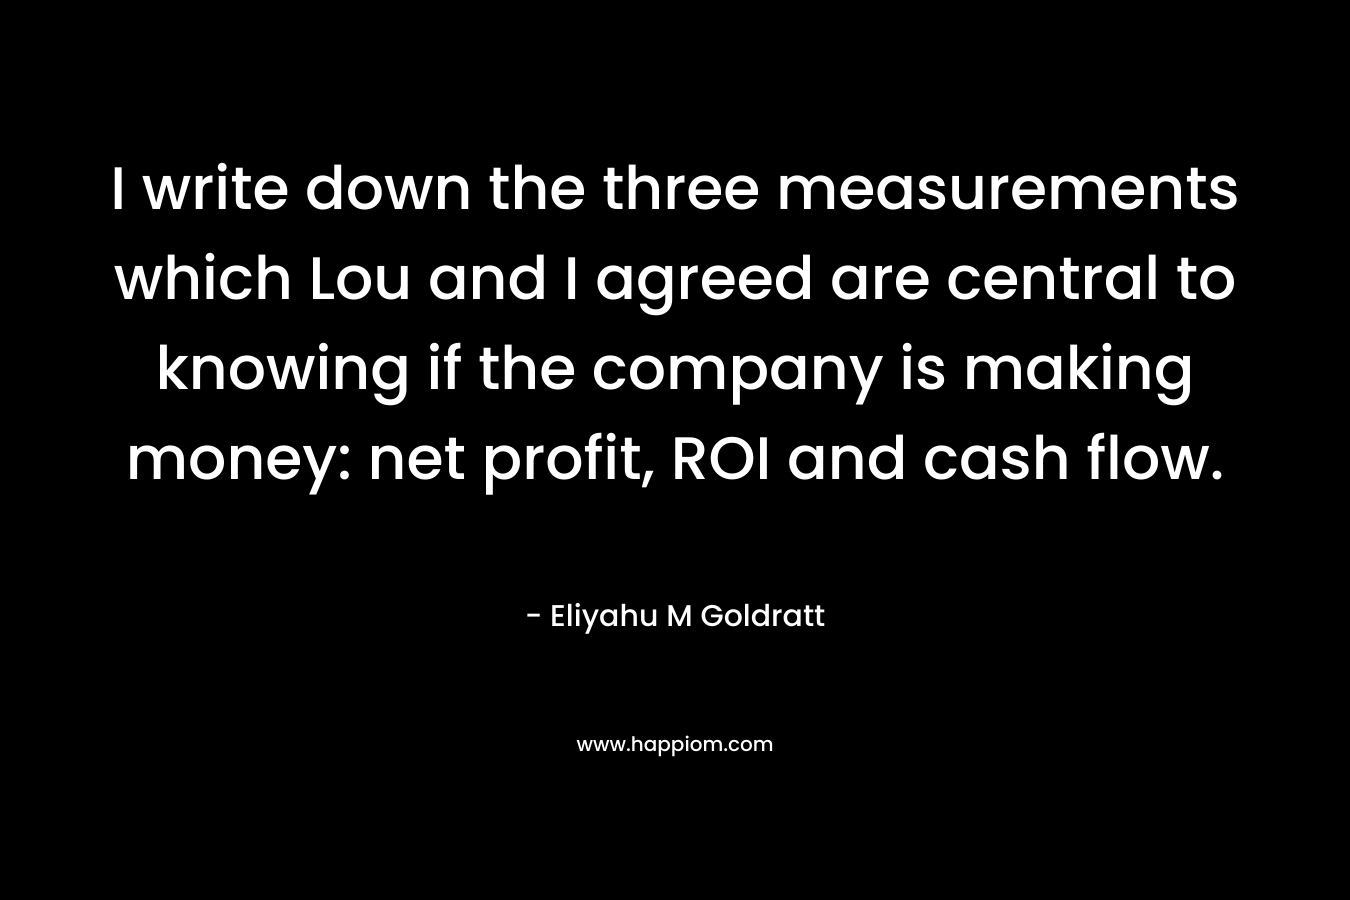 I write down the three measurements which Lou and I agreed are central to knowing if the company is making money: net profit, ROI and cash flow.